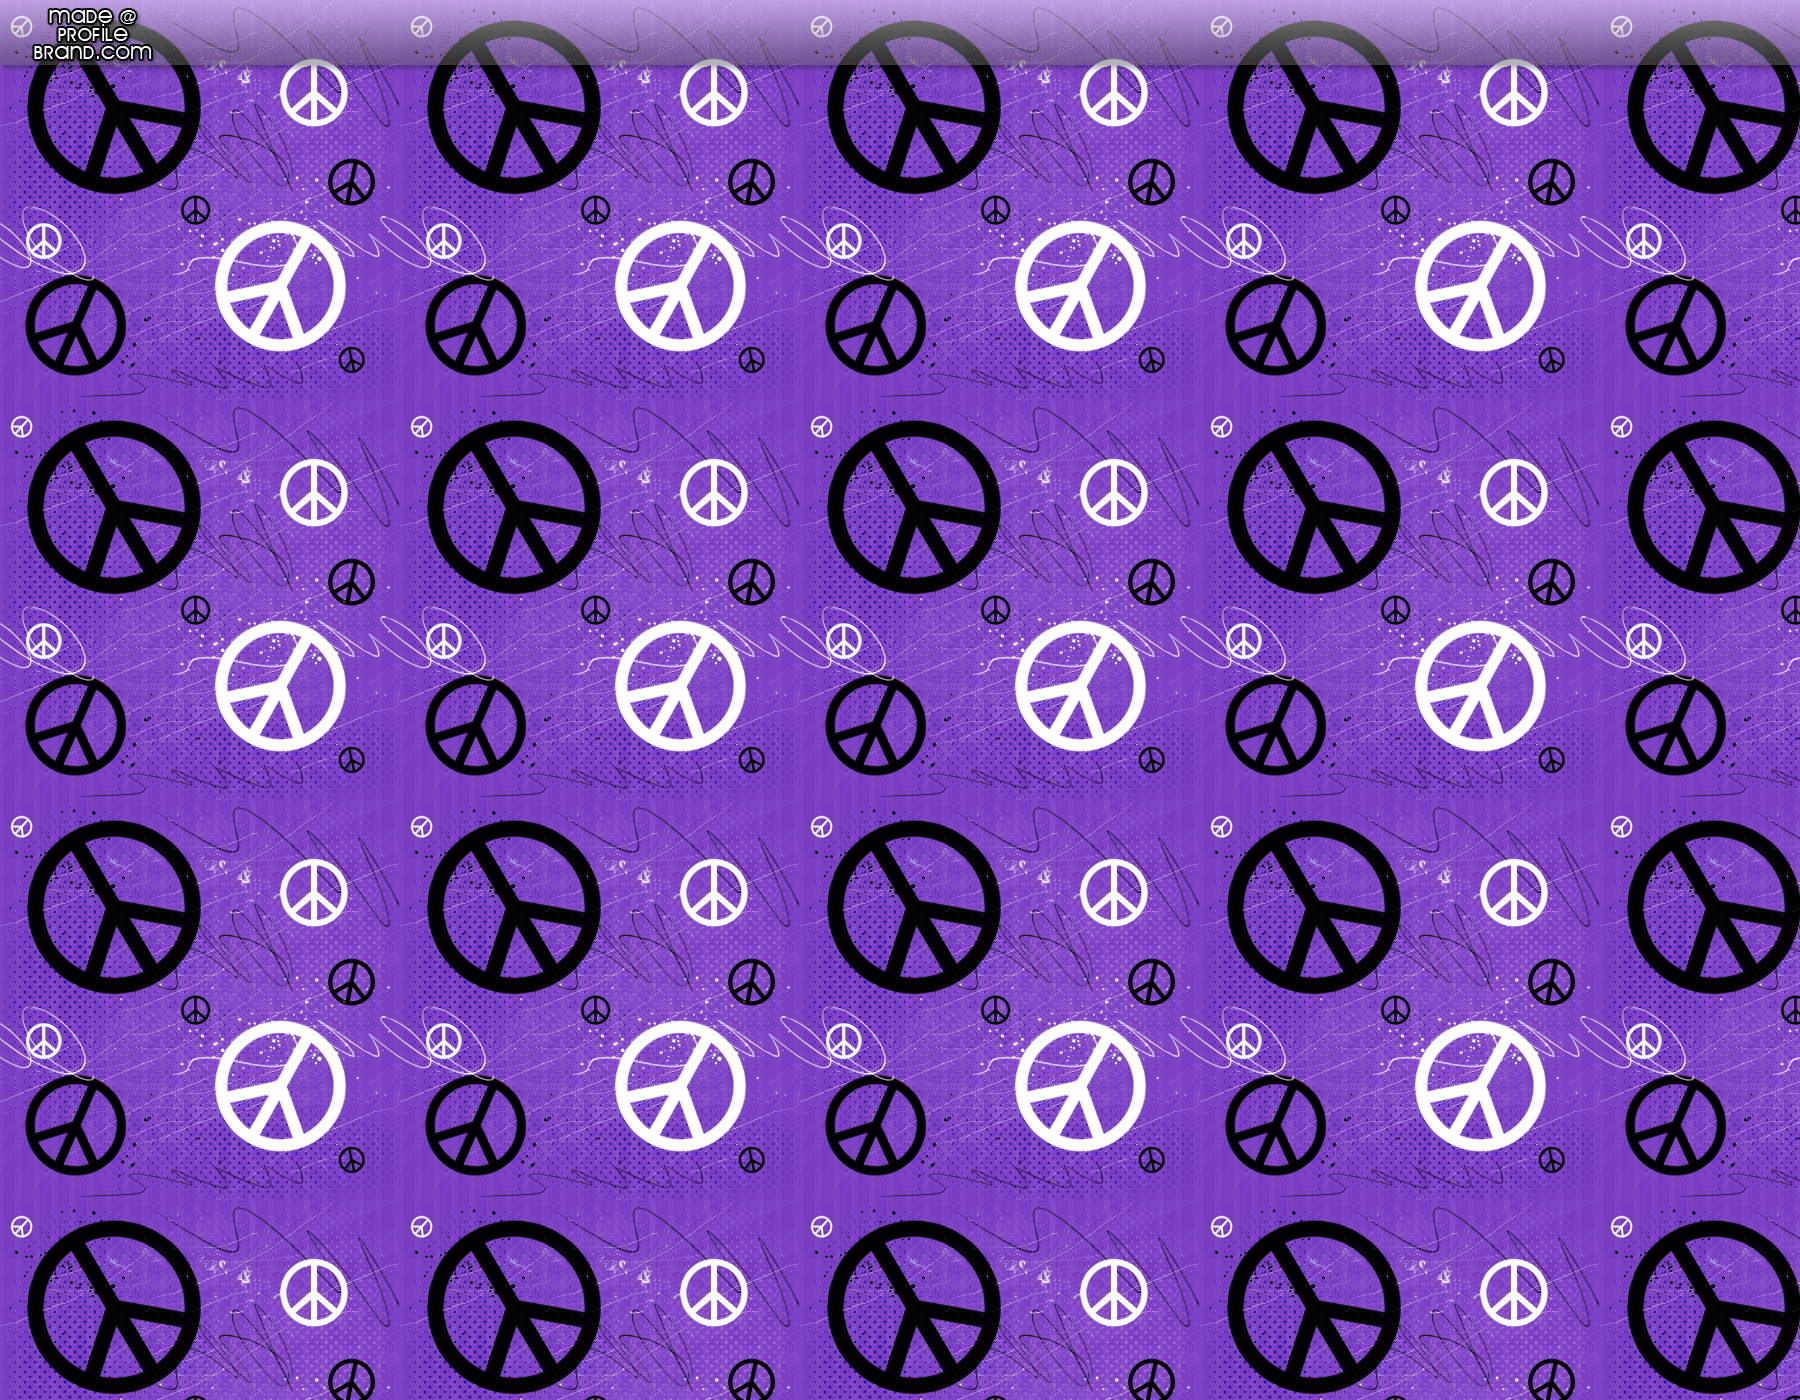 A purple background with white peace signs - Peace